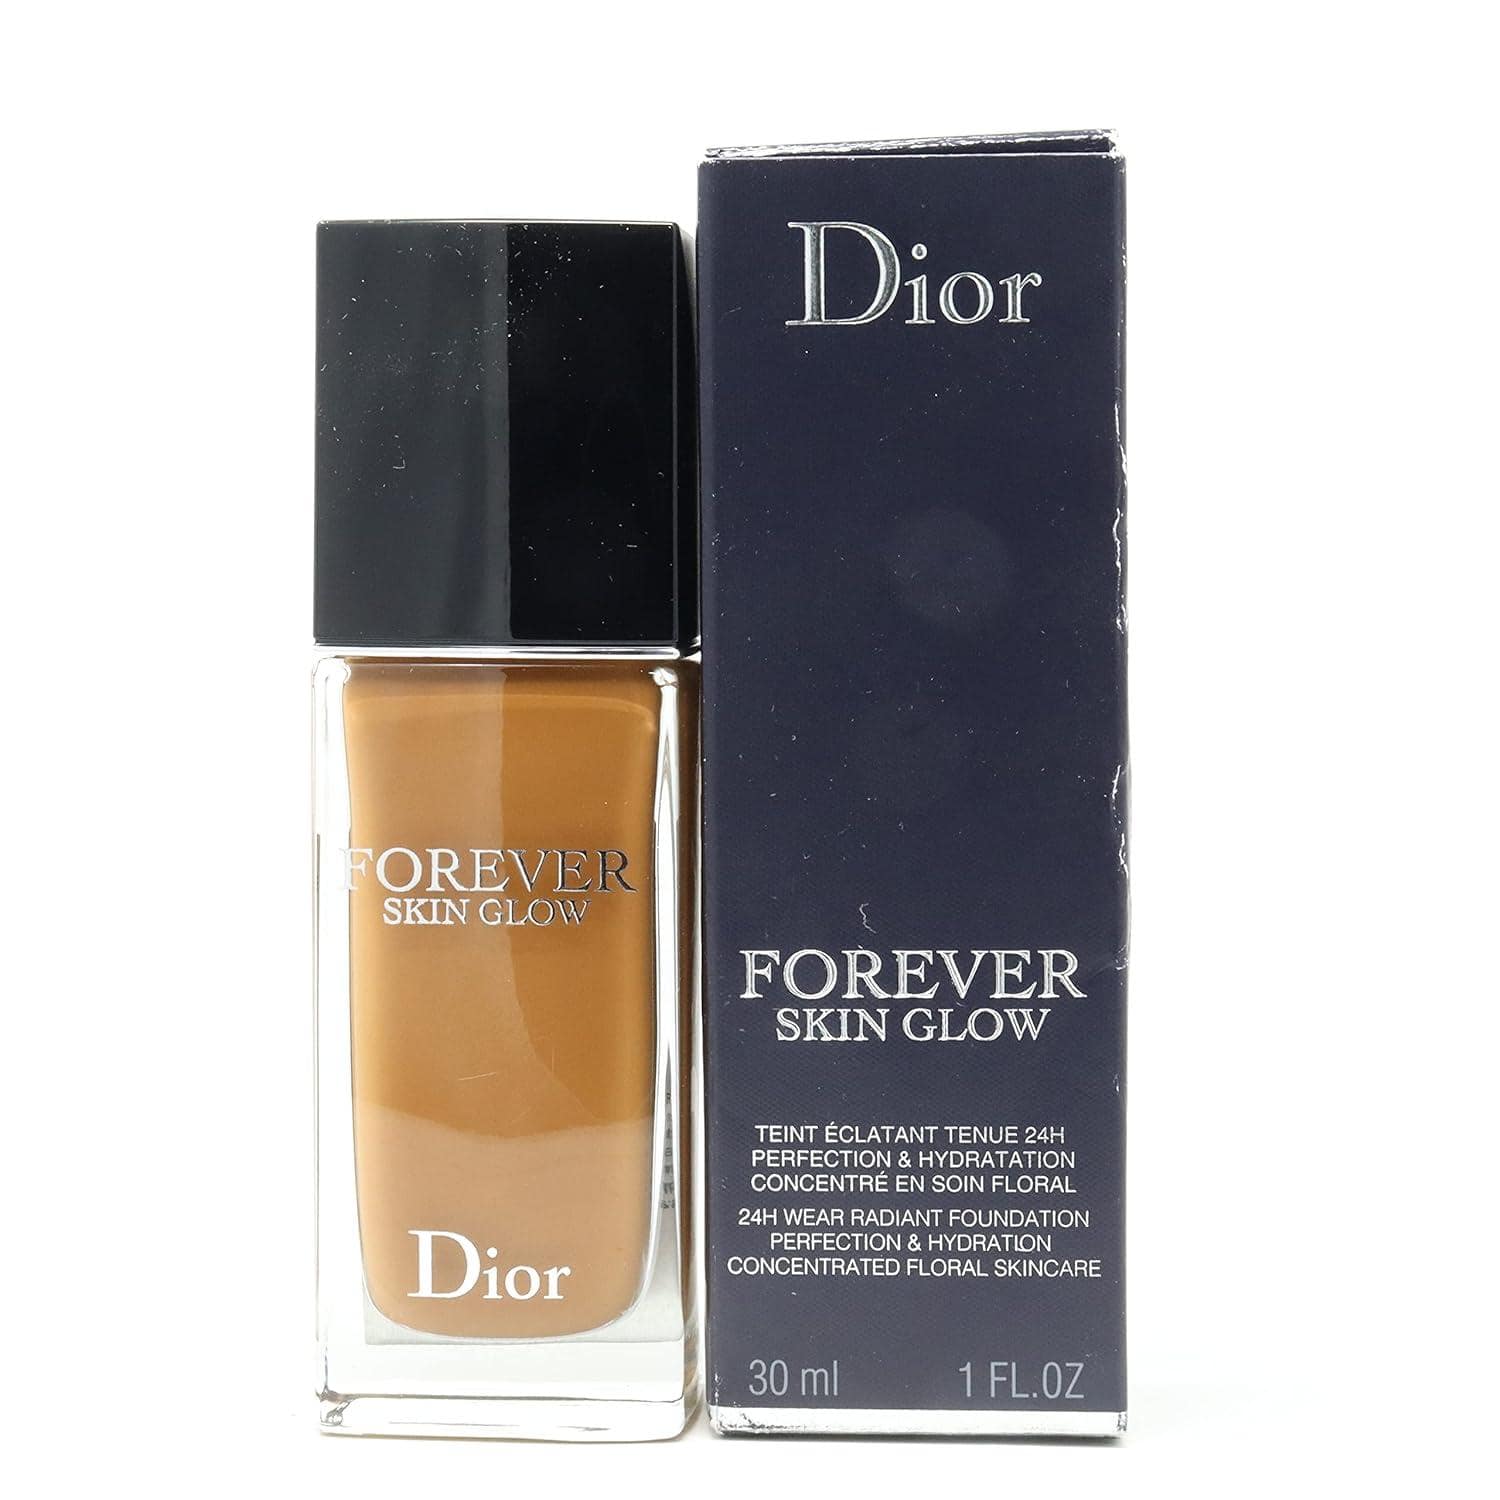 Dior Forever Skin: a hydrating delight that balances my dry combination skin with a natural to satin finish, offering medium, buildable coverage. Confidently worn without additional products, it enhances my complexion with its natural look.
